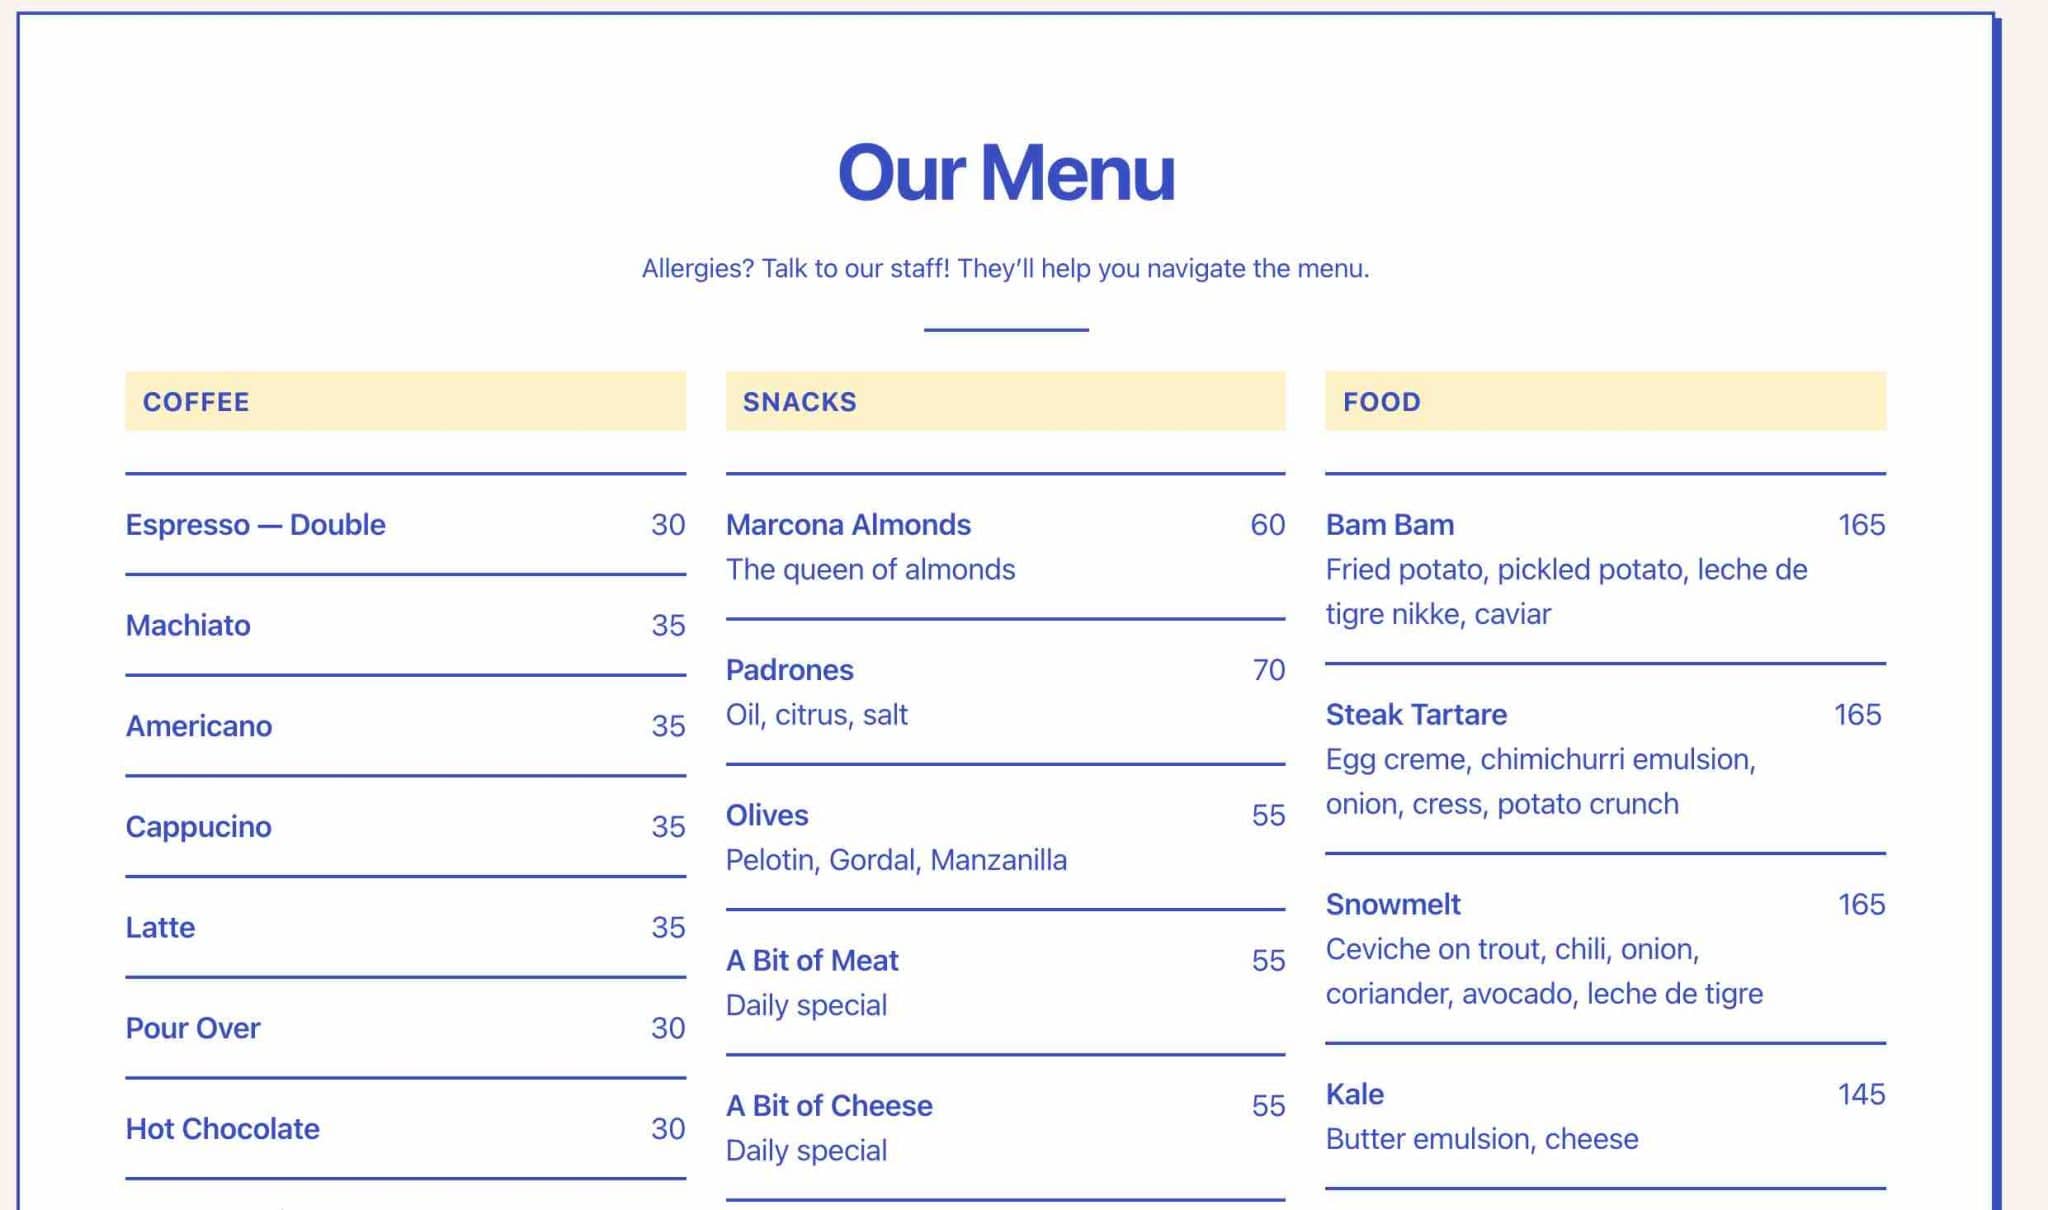 A Tove theme pattern presenting a typical menu example for a restaurant.